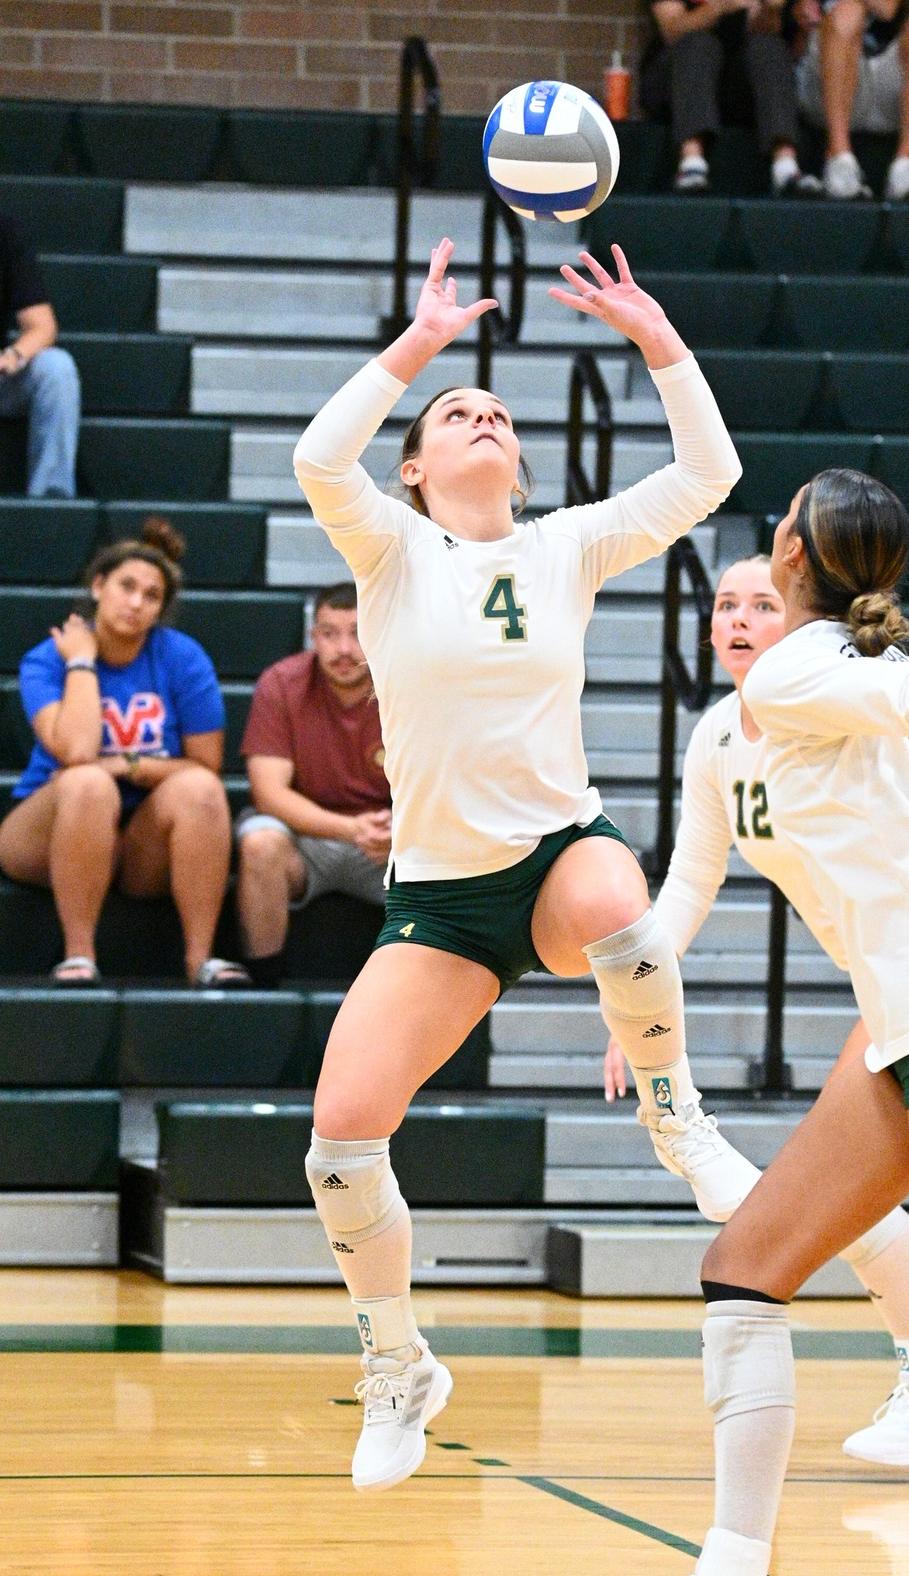 Volleyball Team Earn Individual Awards; Rath Named Player of the Year & Setter of the Year